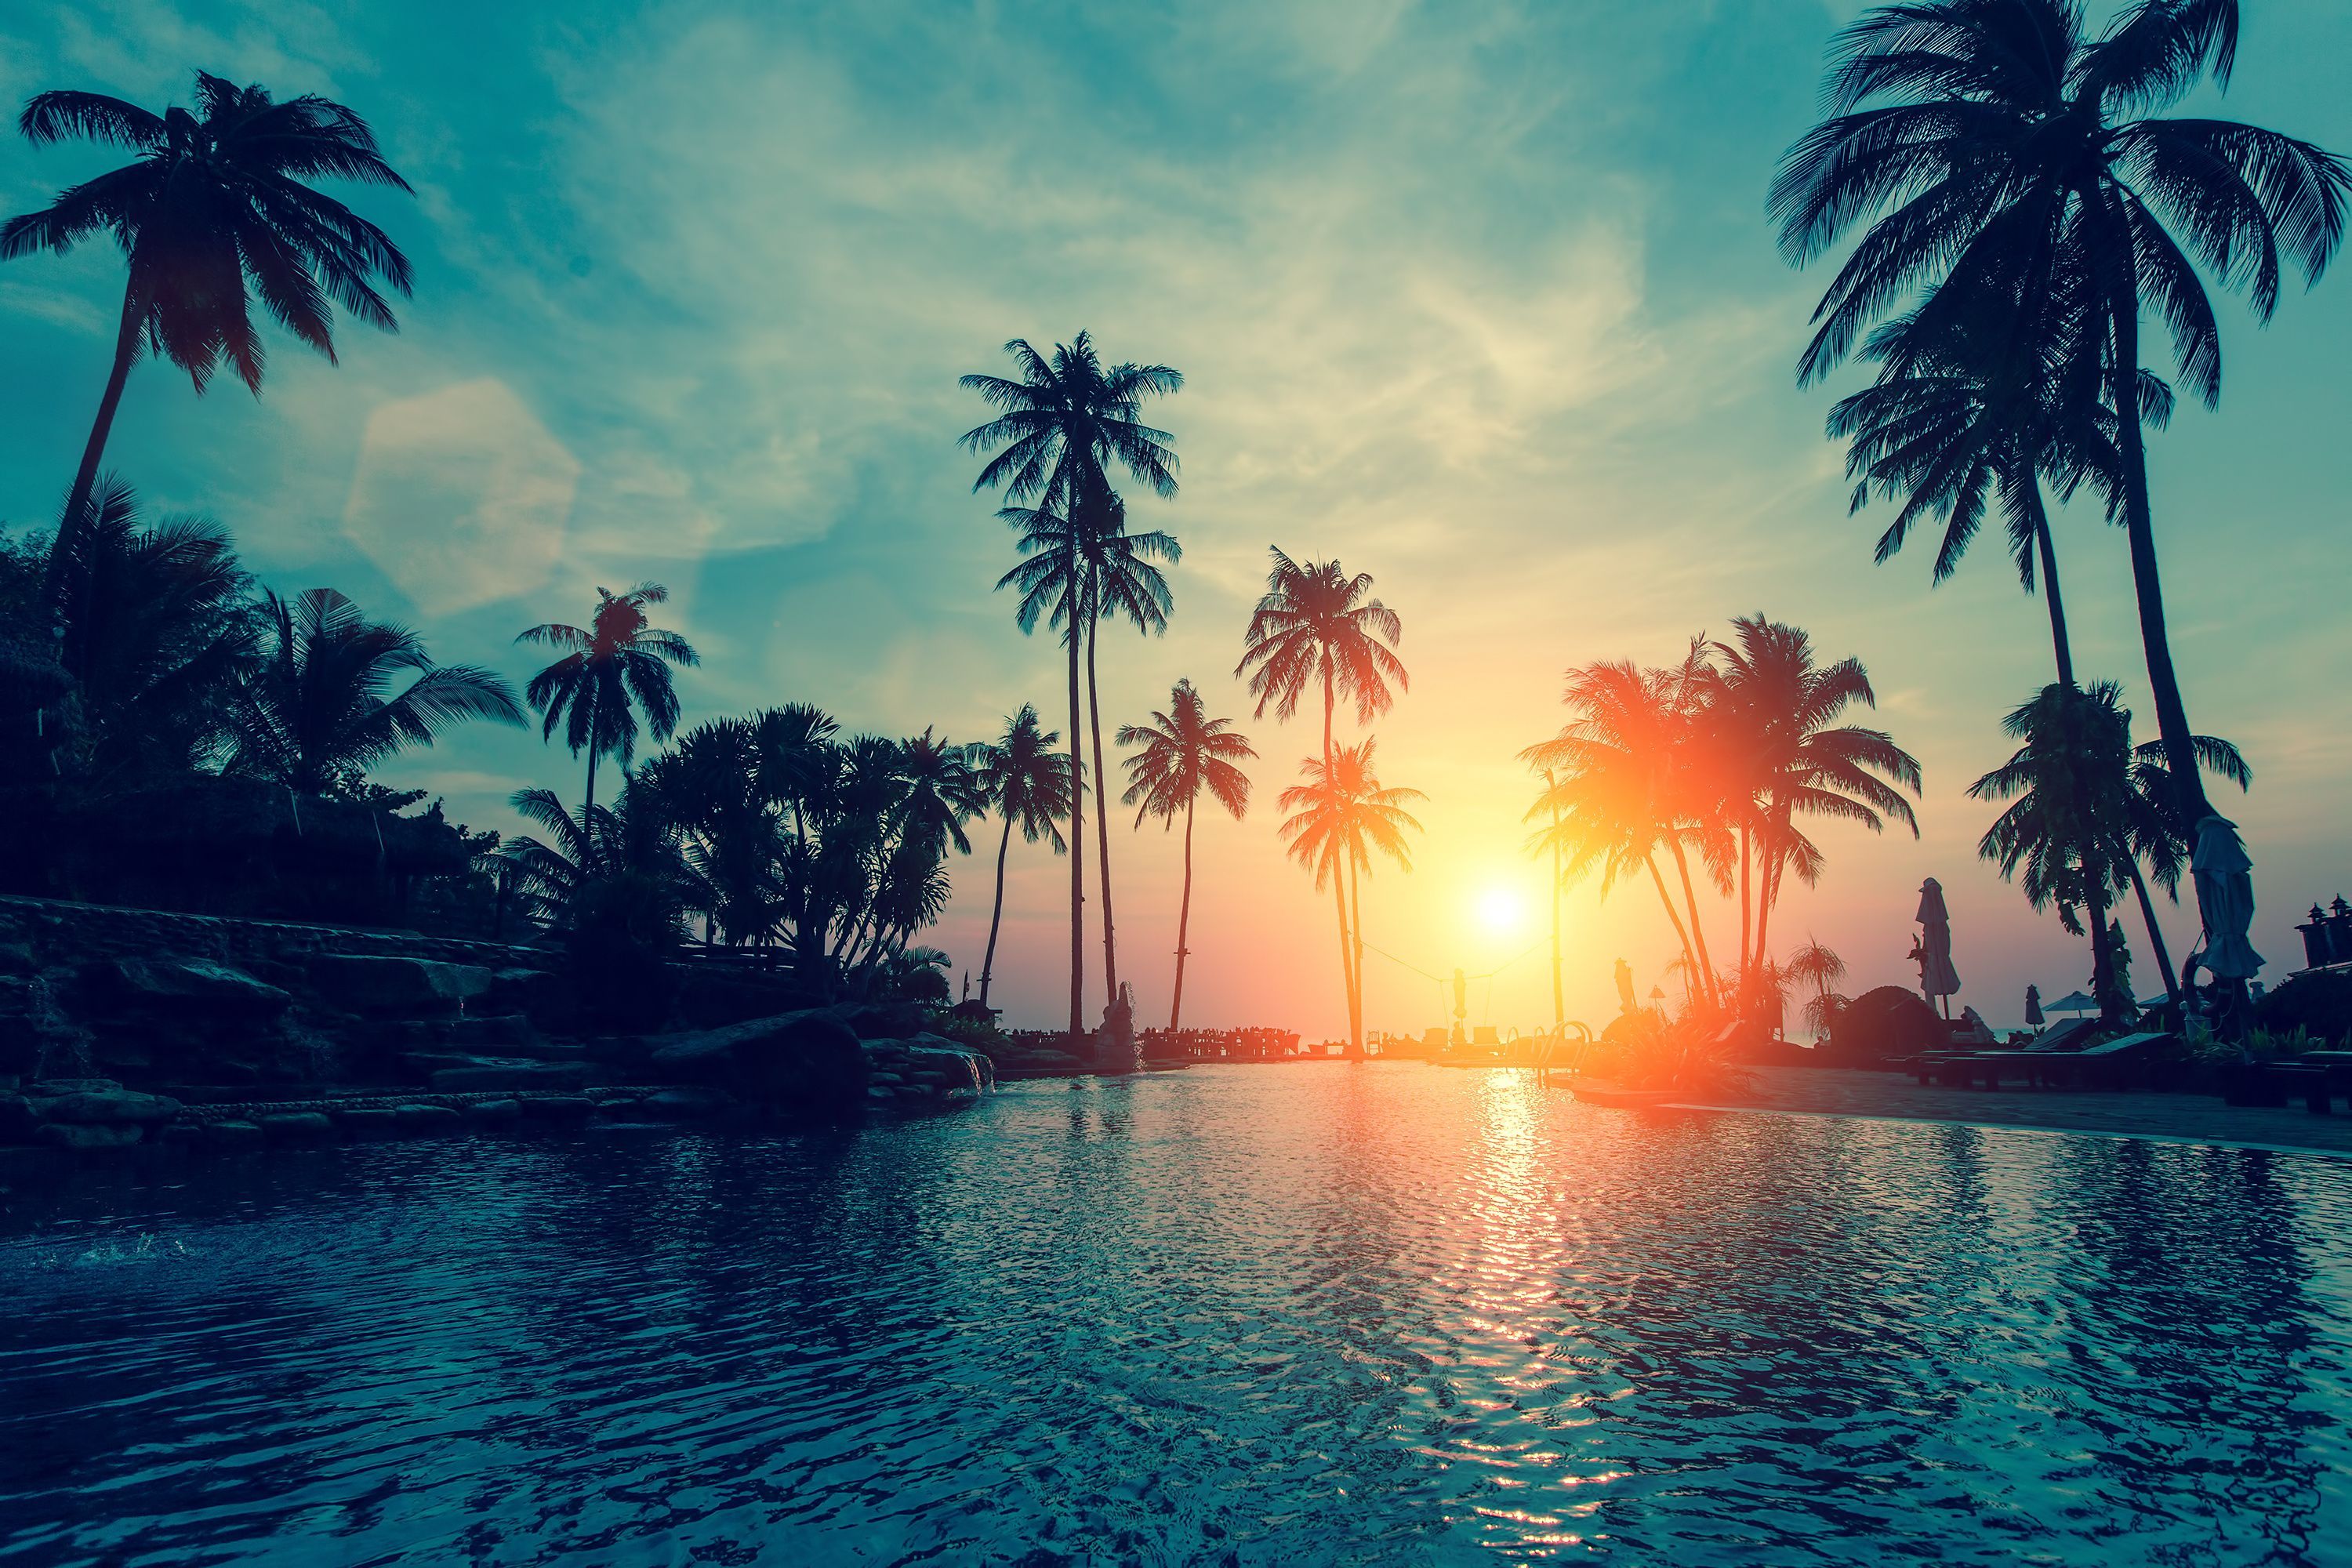 Top 999+ Palm Tree Wallpaper Full HD, 4K✓Free to Use